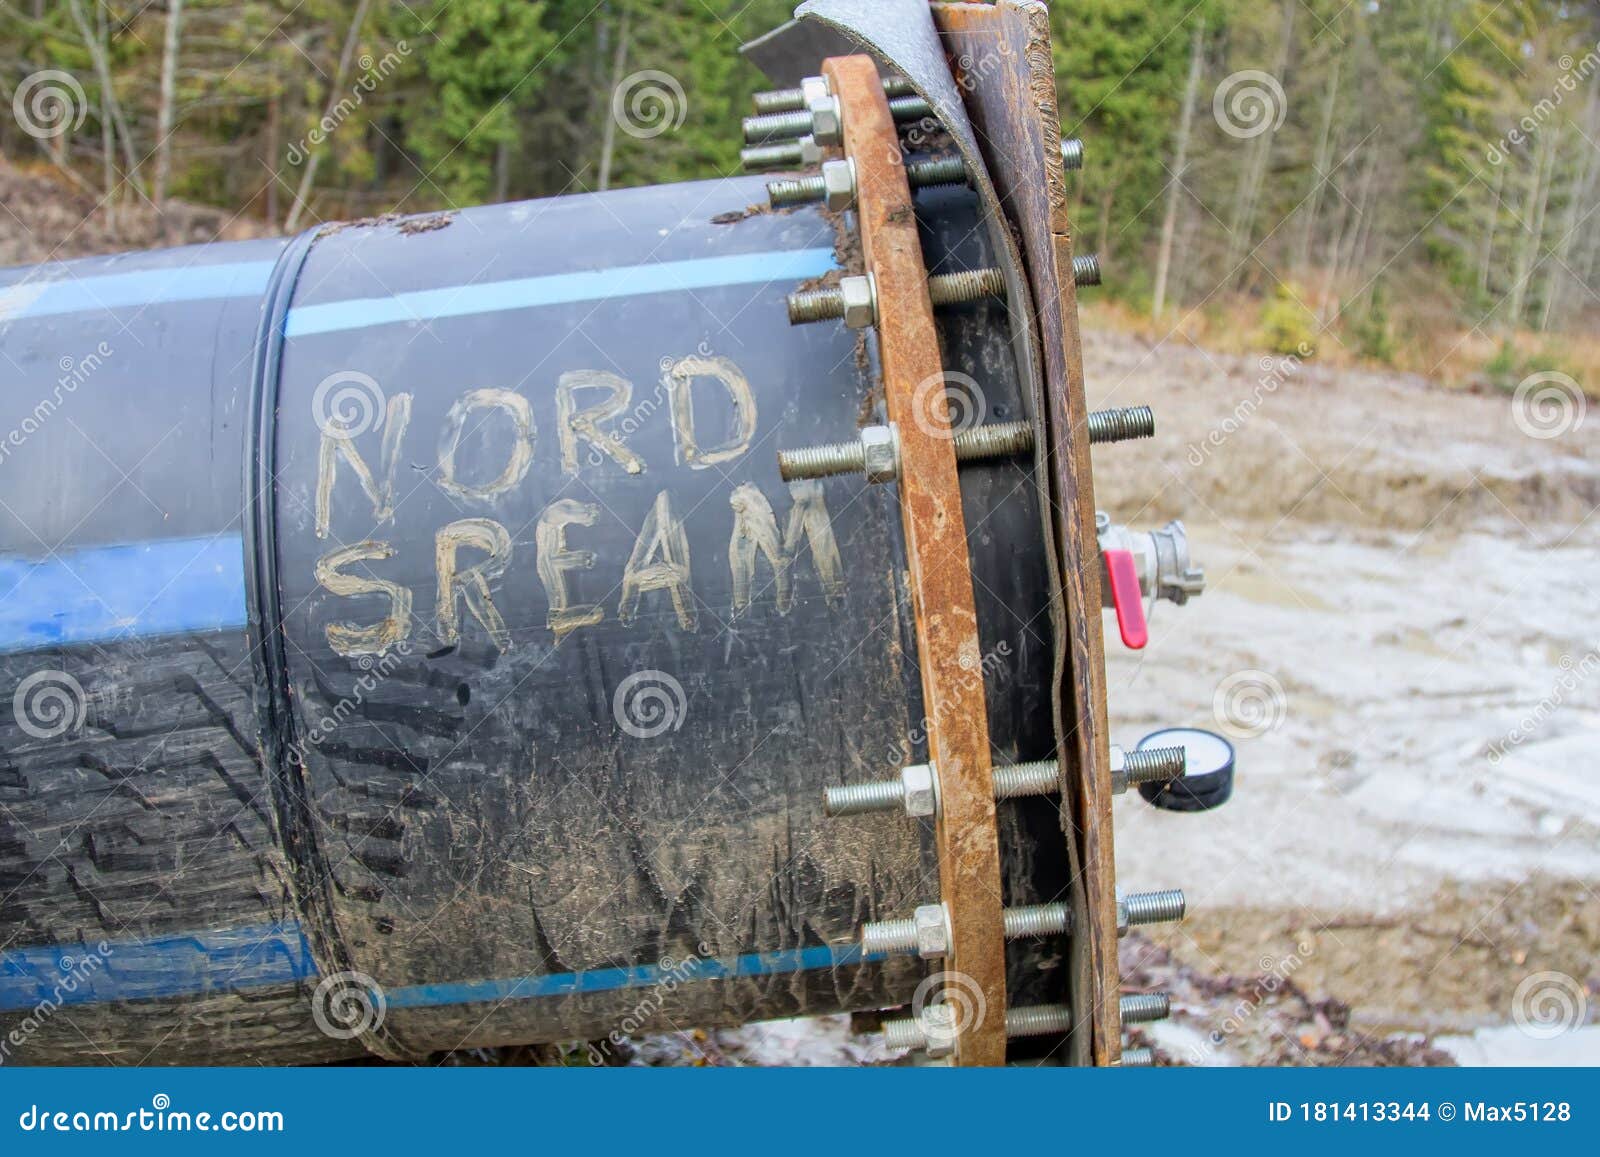 metal plug on the water pipe to the nord stream 2 pipeline